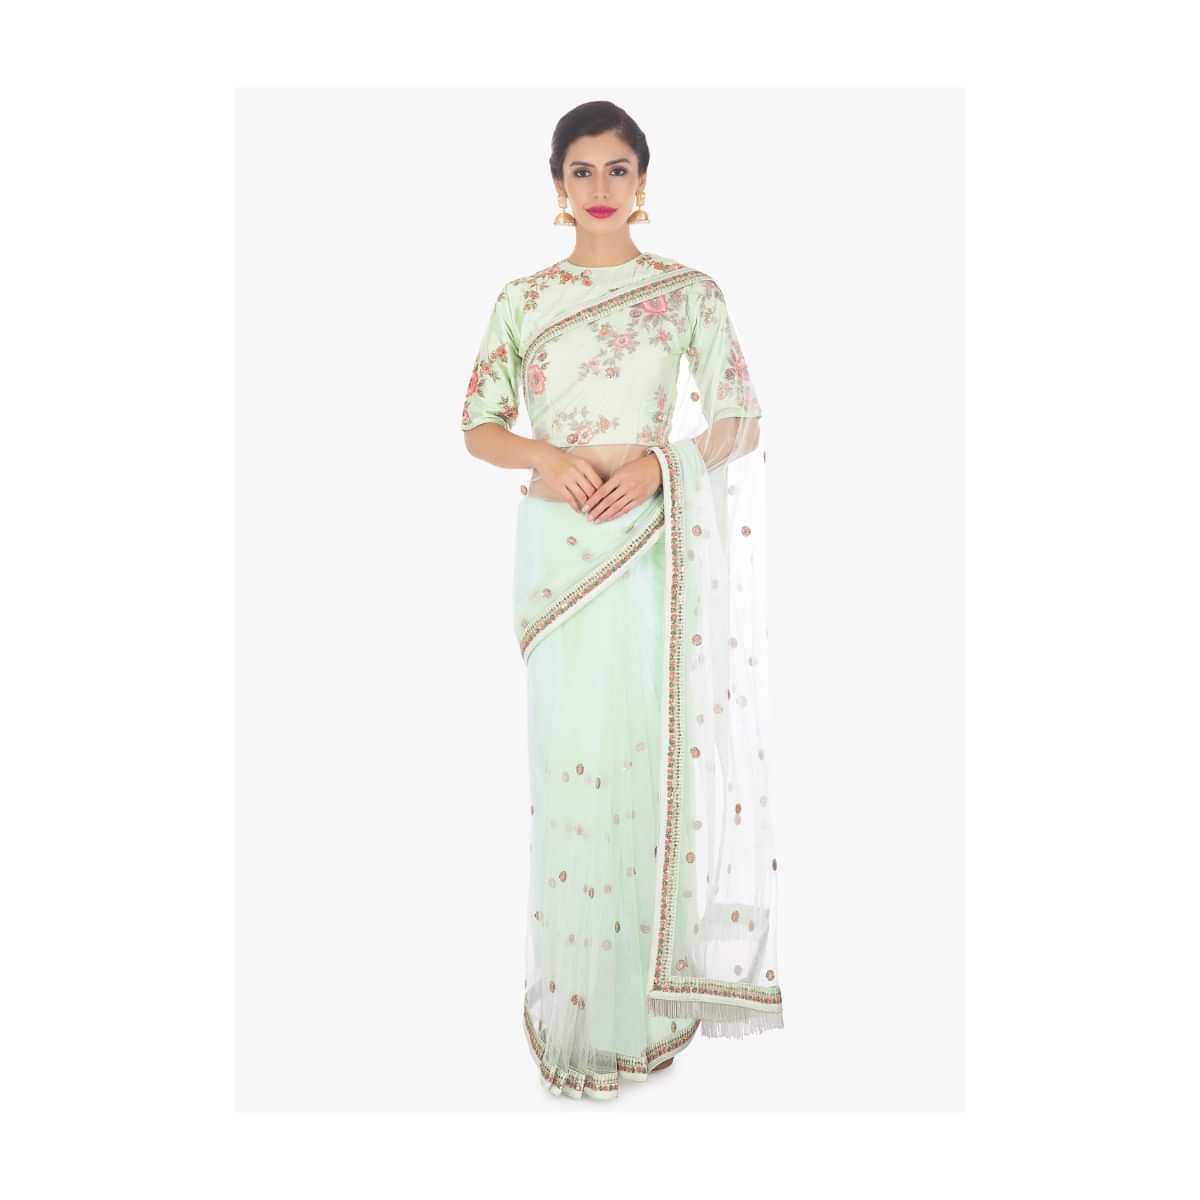 Pistachio Saree In Net Paired With A Matching Raw Silk Blouse Online - Kalki Fashion